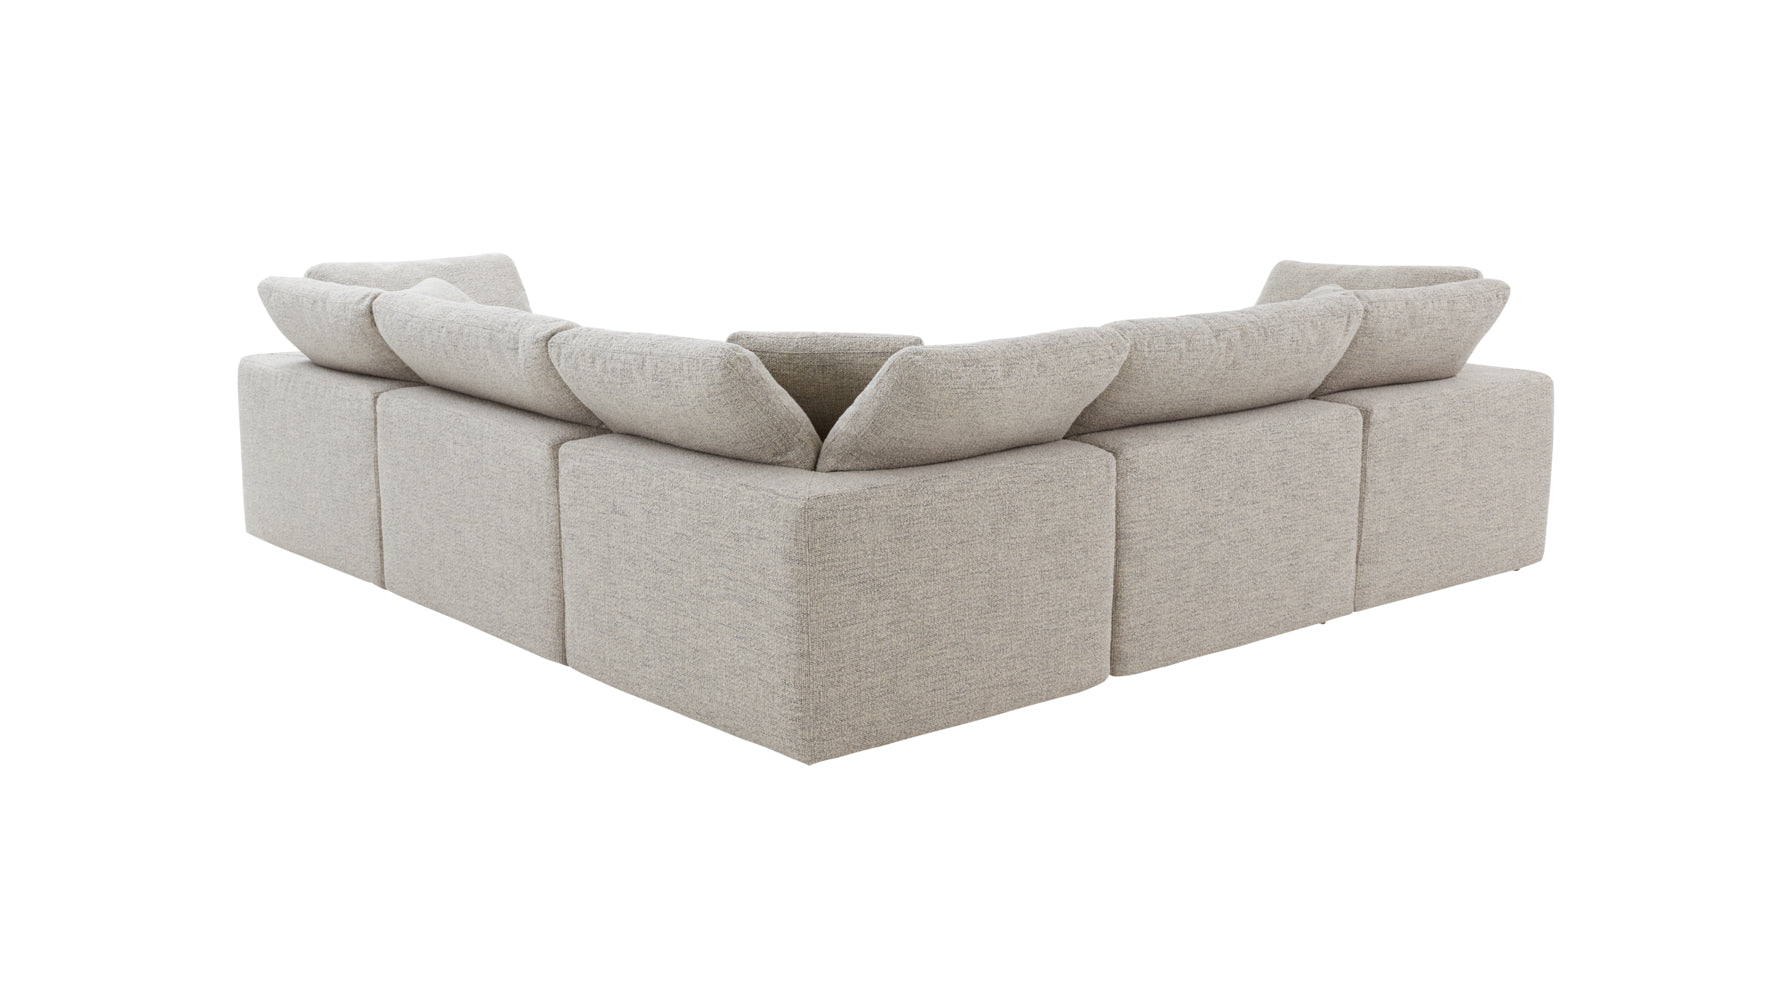 Movie Night™ 5-Piece Modular Sectional Closed, Standard, Oatmeal - Image 8